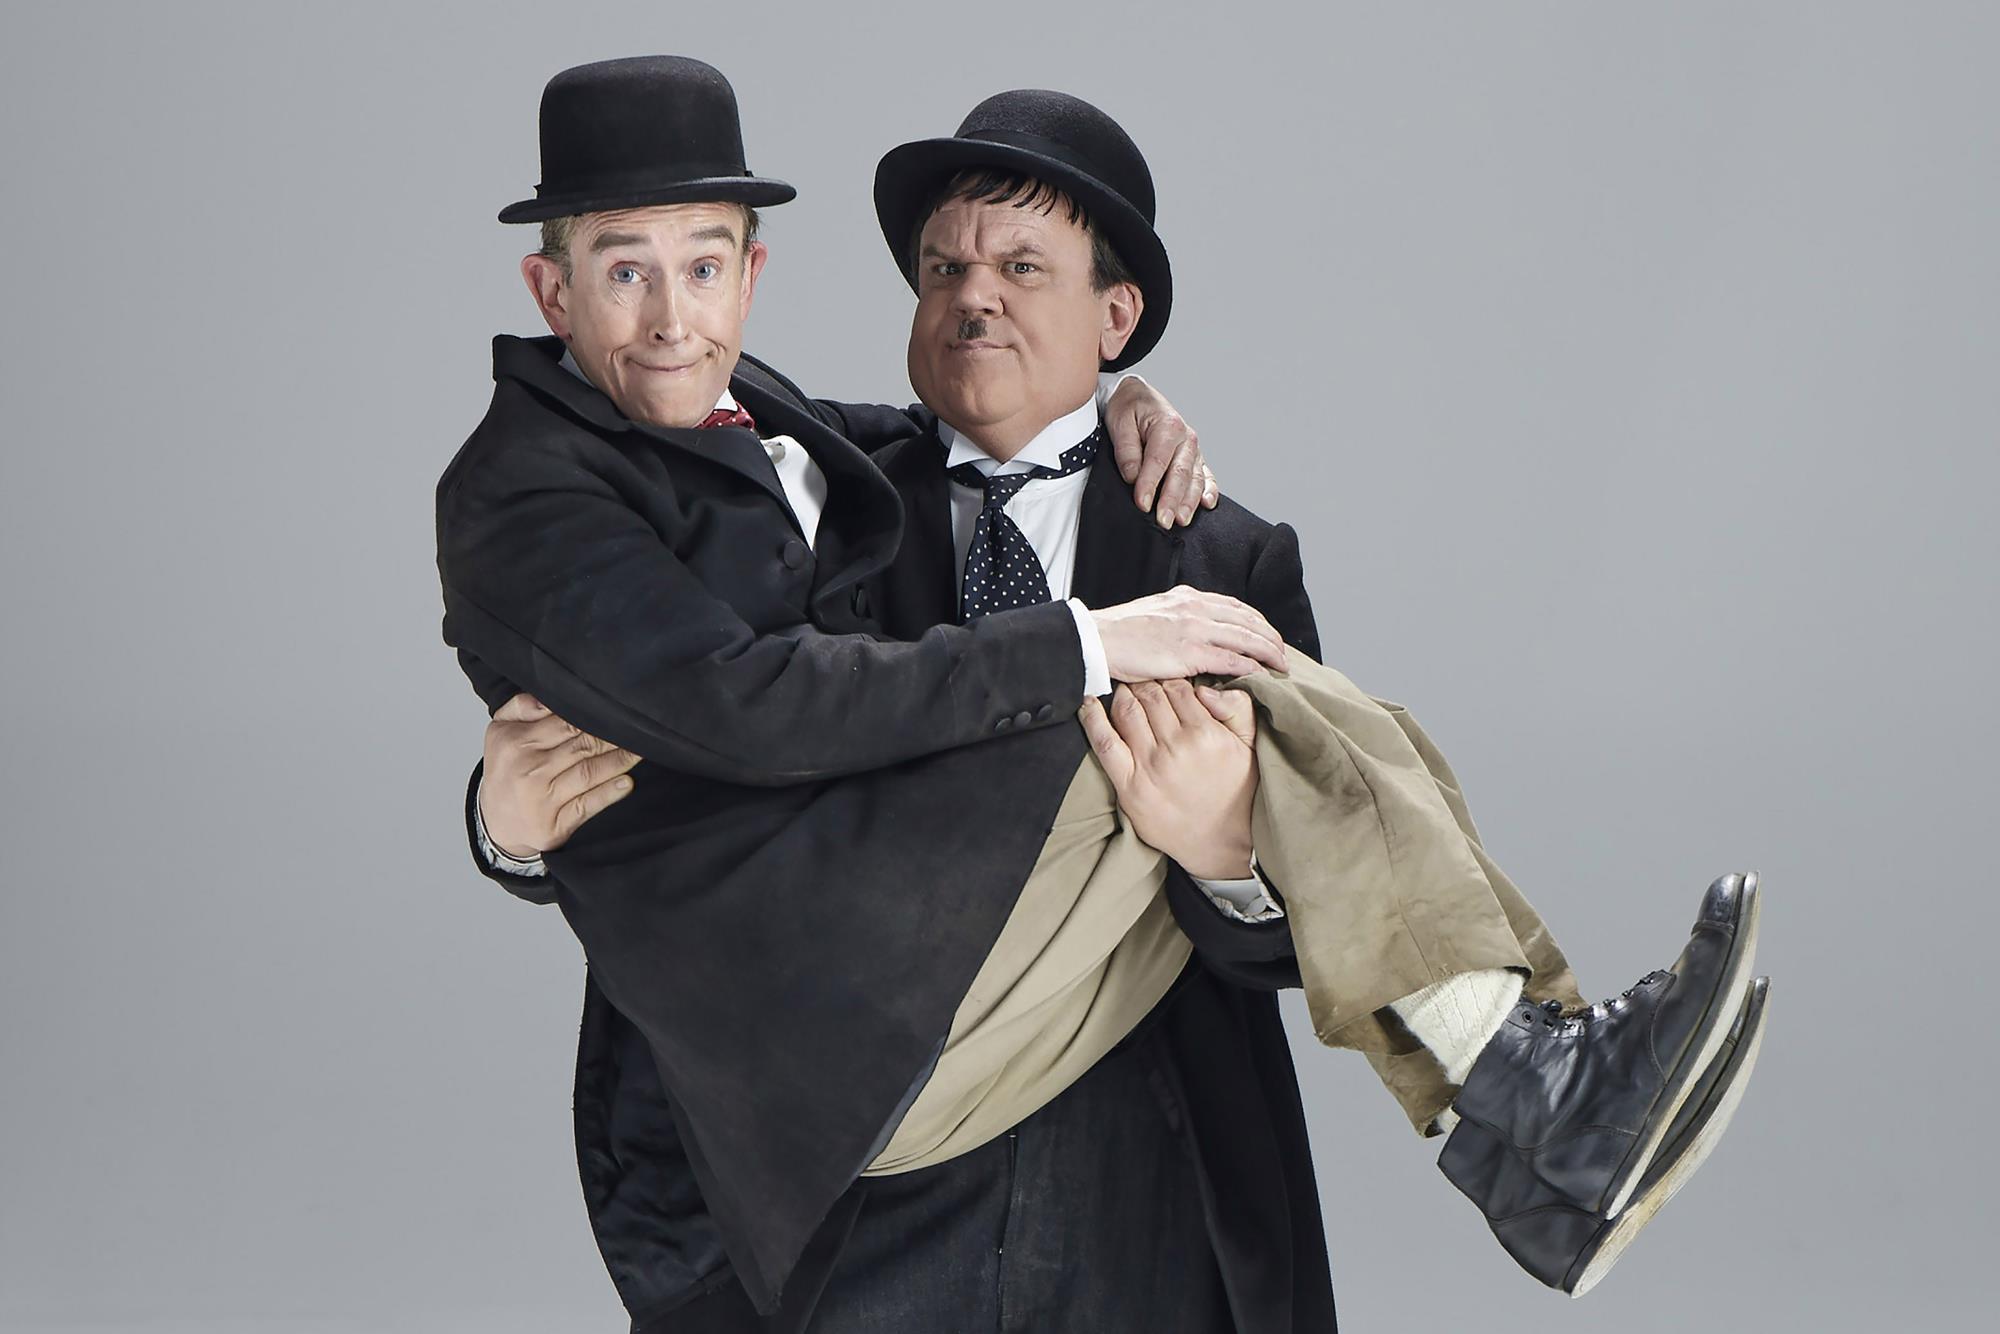 Image result for stan and ollie